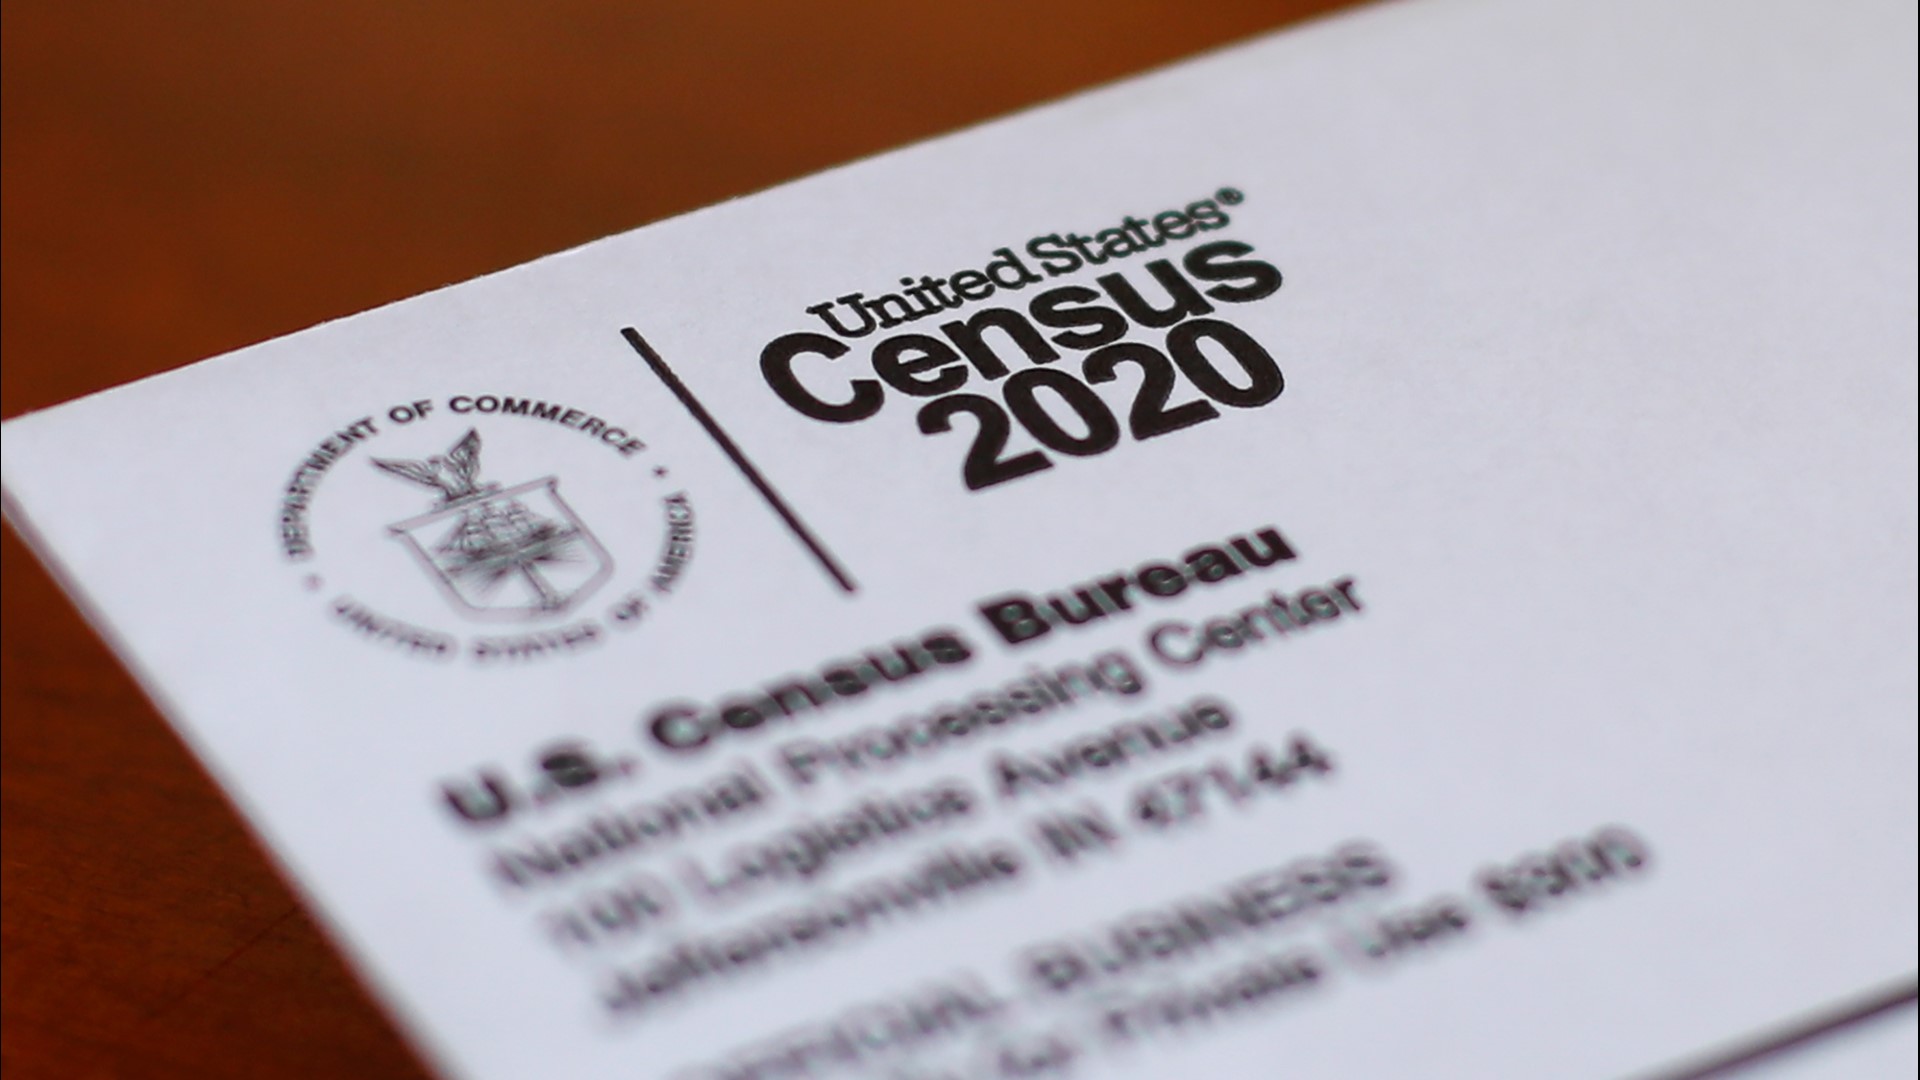 Some legislators are upset by the decision to make the deadline for U.S. census data collection September 30, rather than the originally proposed October 31.